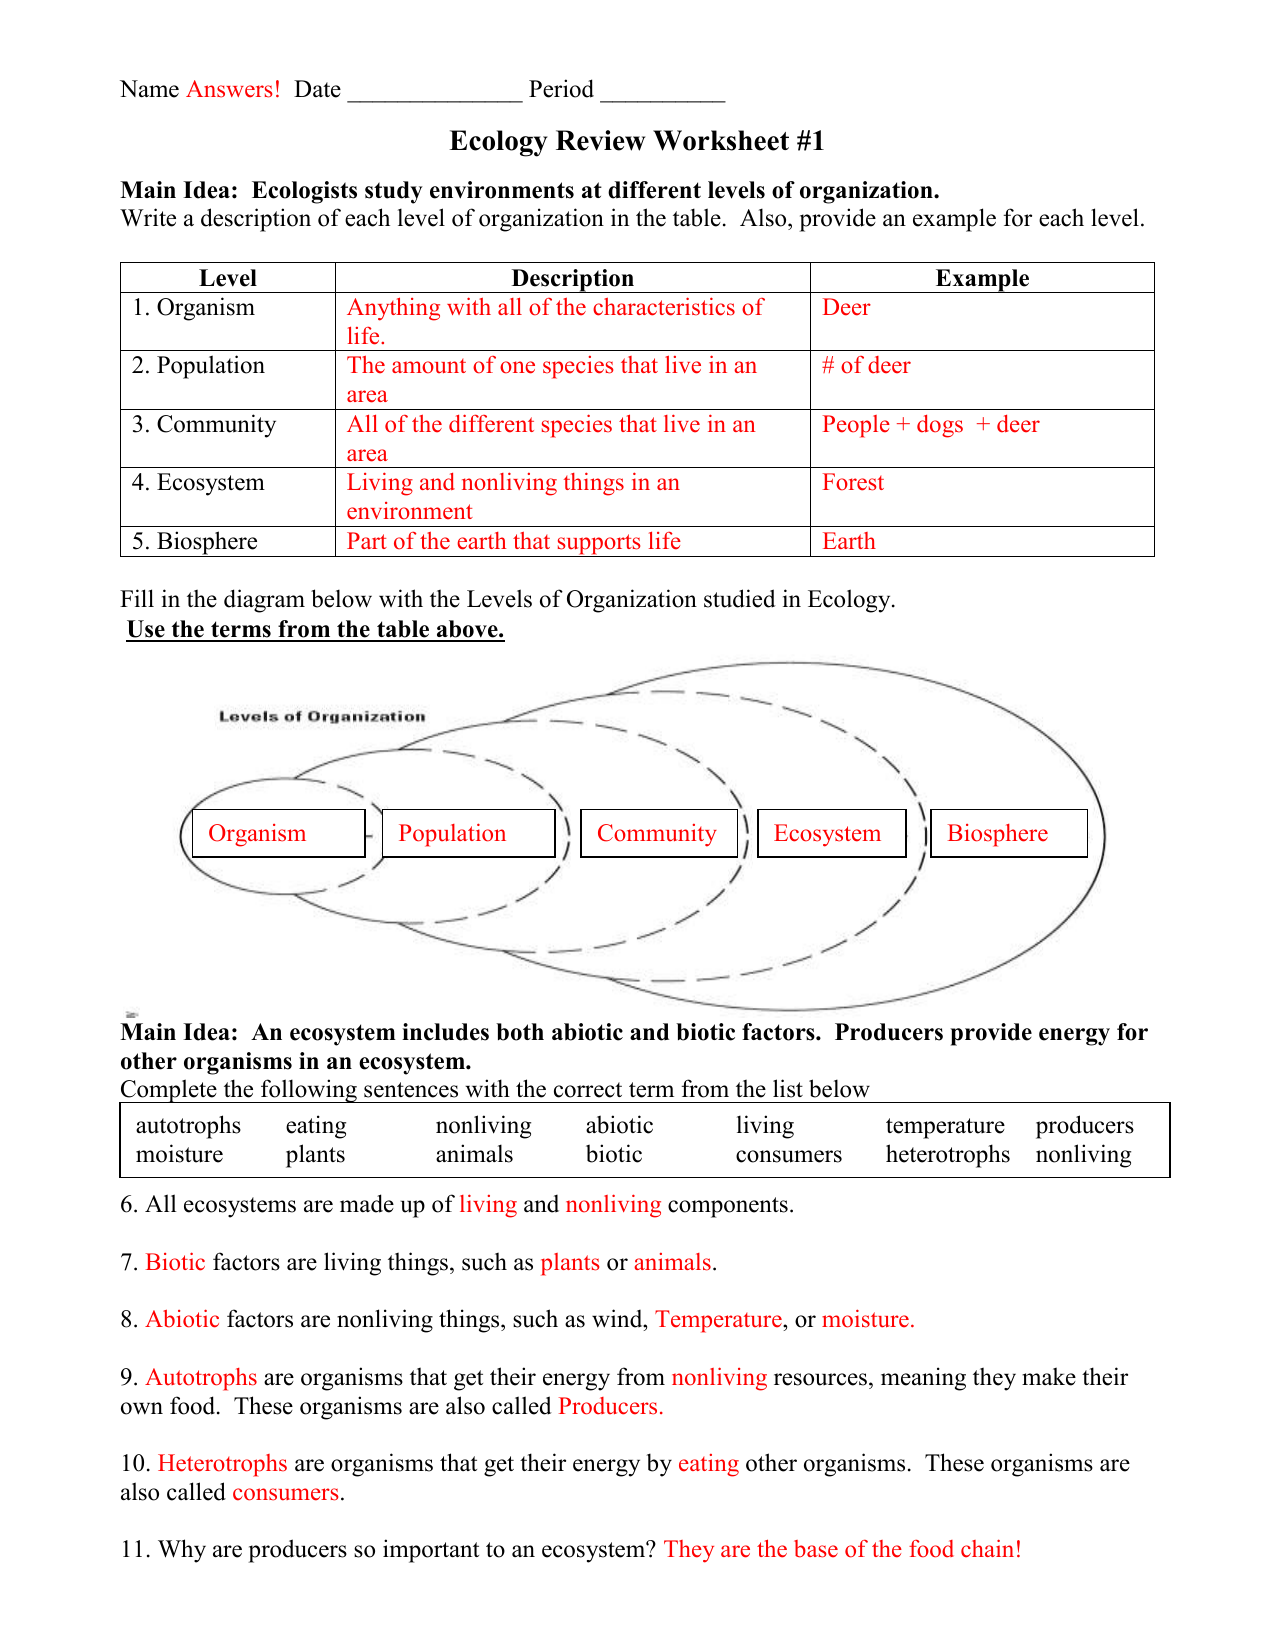 ecology-review-worksheet-22-answers With Ecology Review Worksheet 1